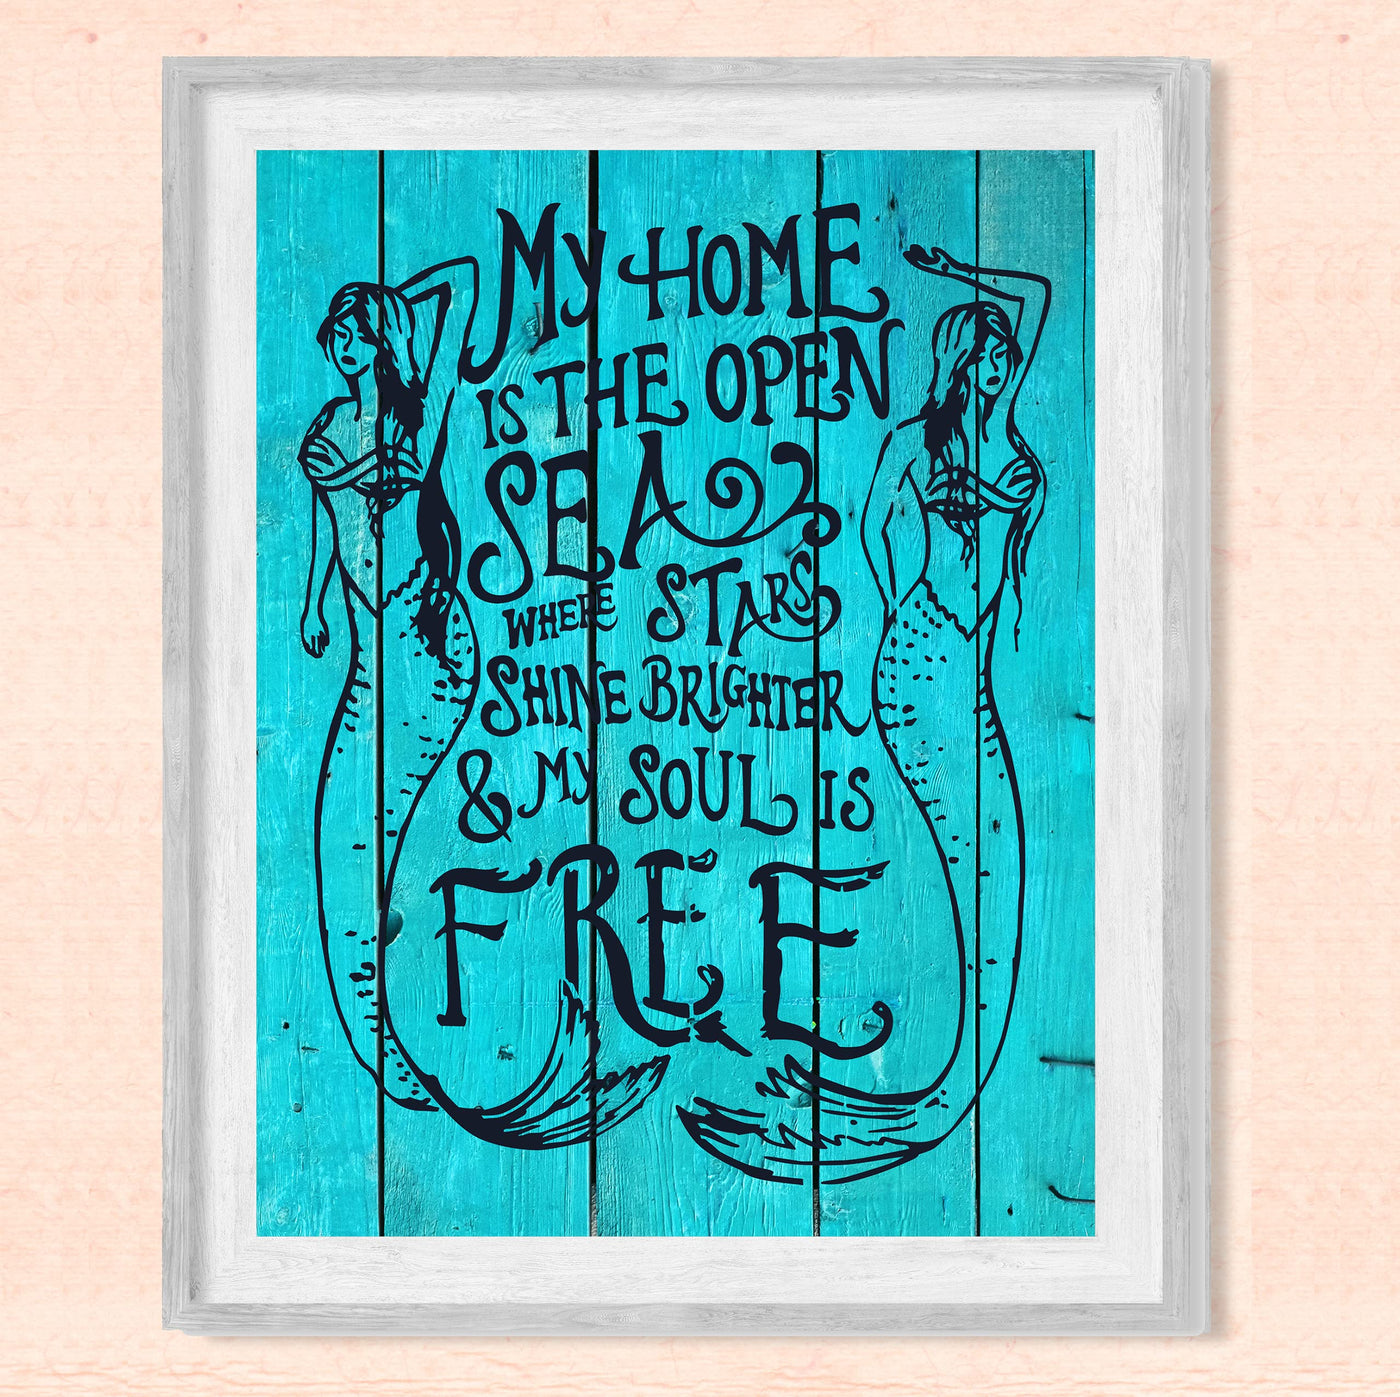 My Home Is the Open Sea-TEAL Inspirational Beach Wall Decor -8 x 10" Nautical Mermaid Art Print w/Distressed Wood Design-Ready to Frame. Home-Bedroom-Ocean Theme Decor. Perfect for the Beach House!